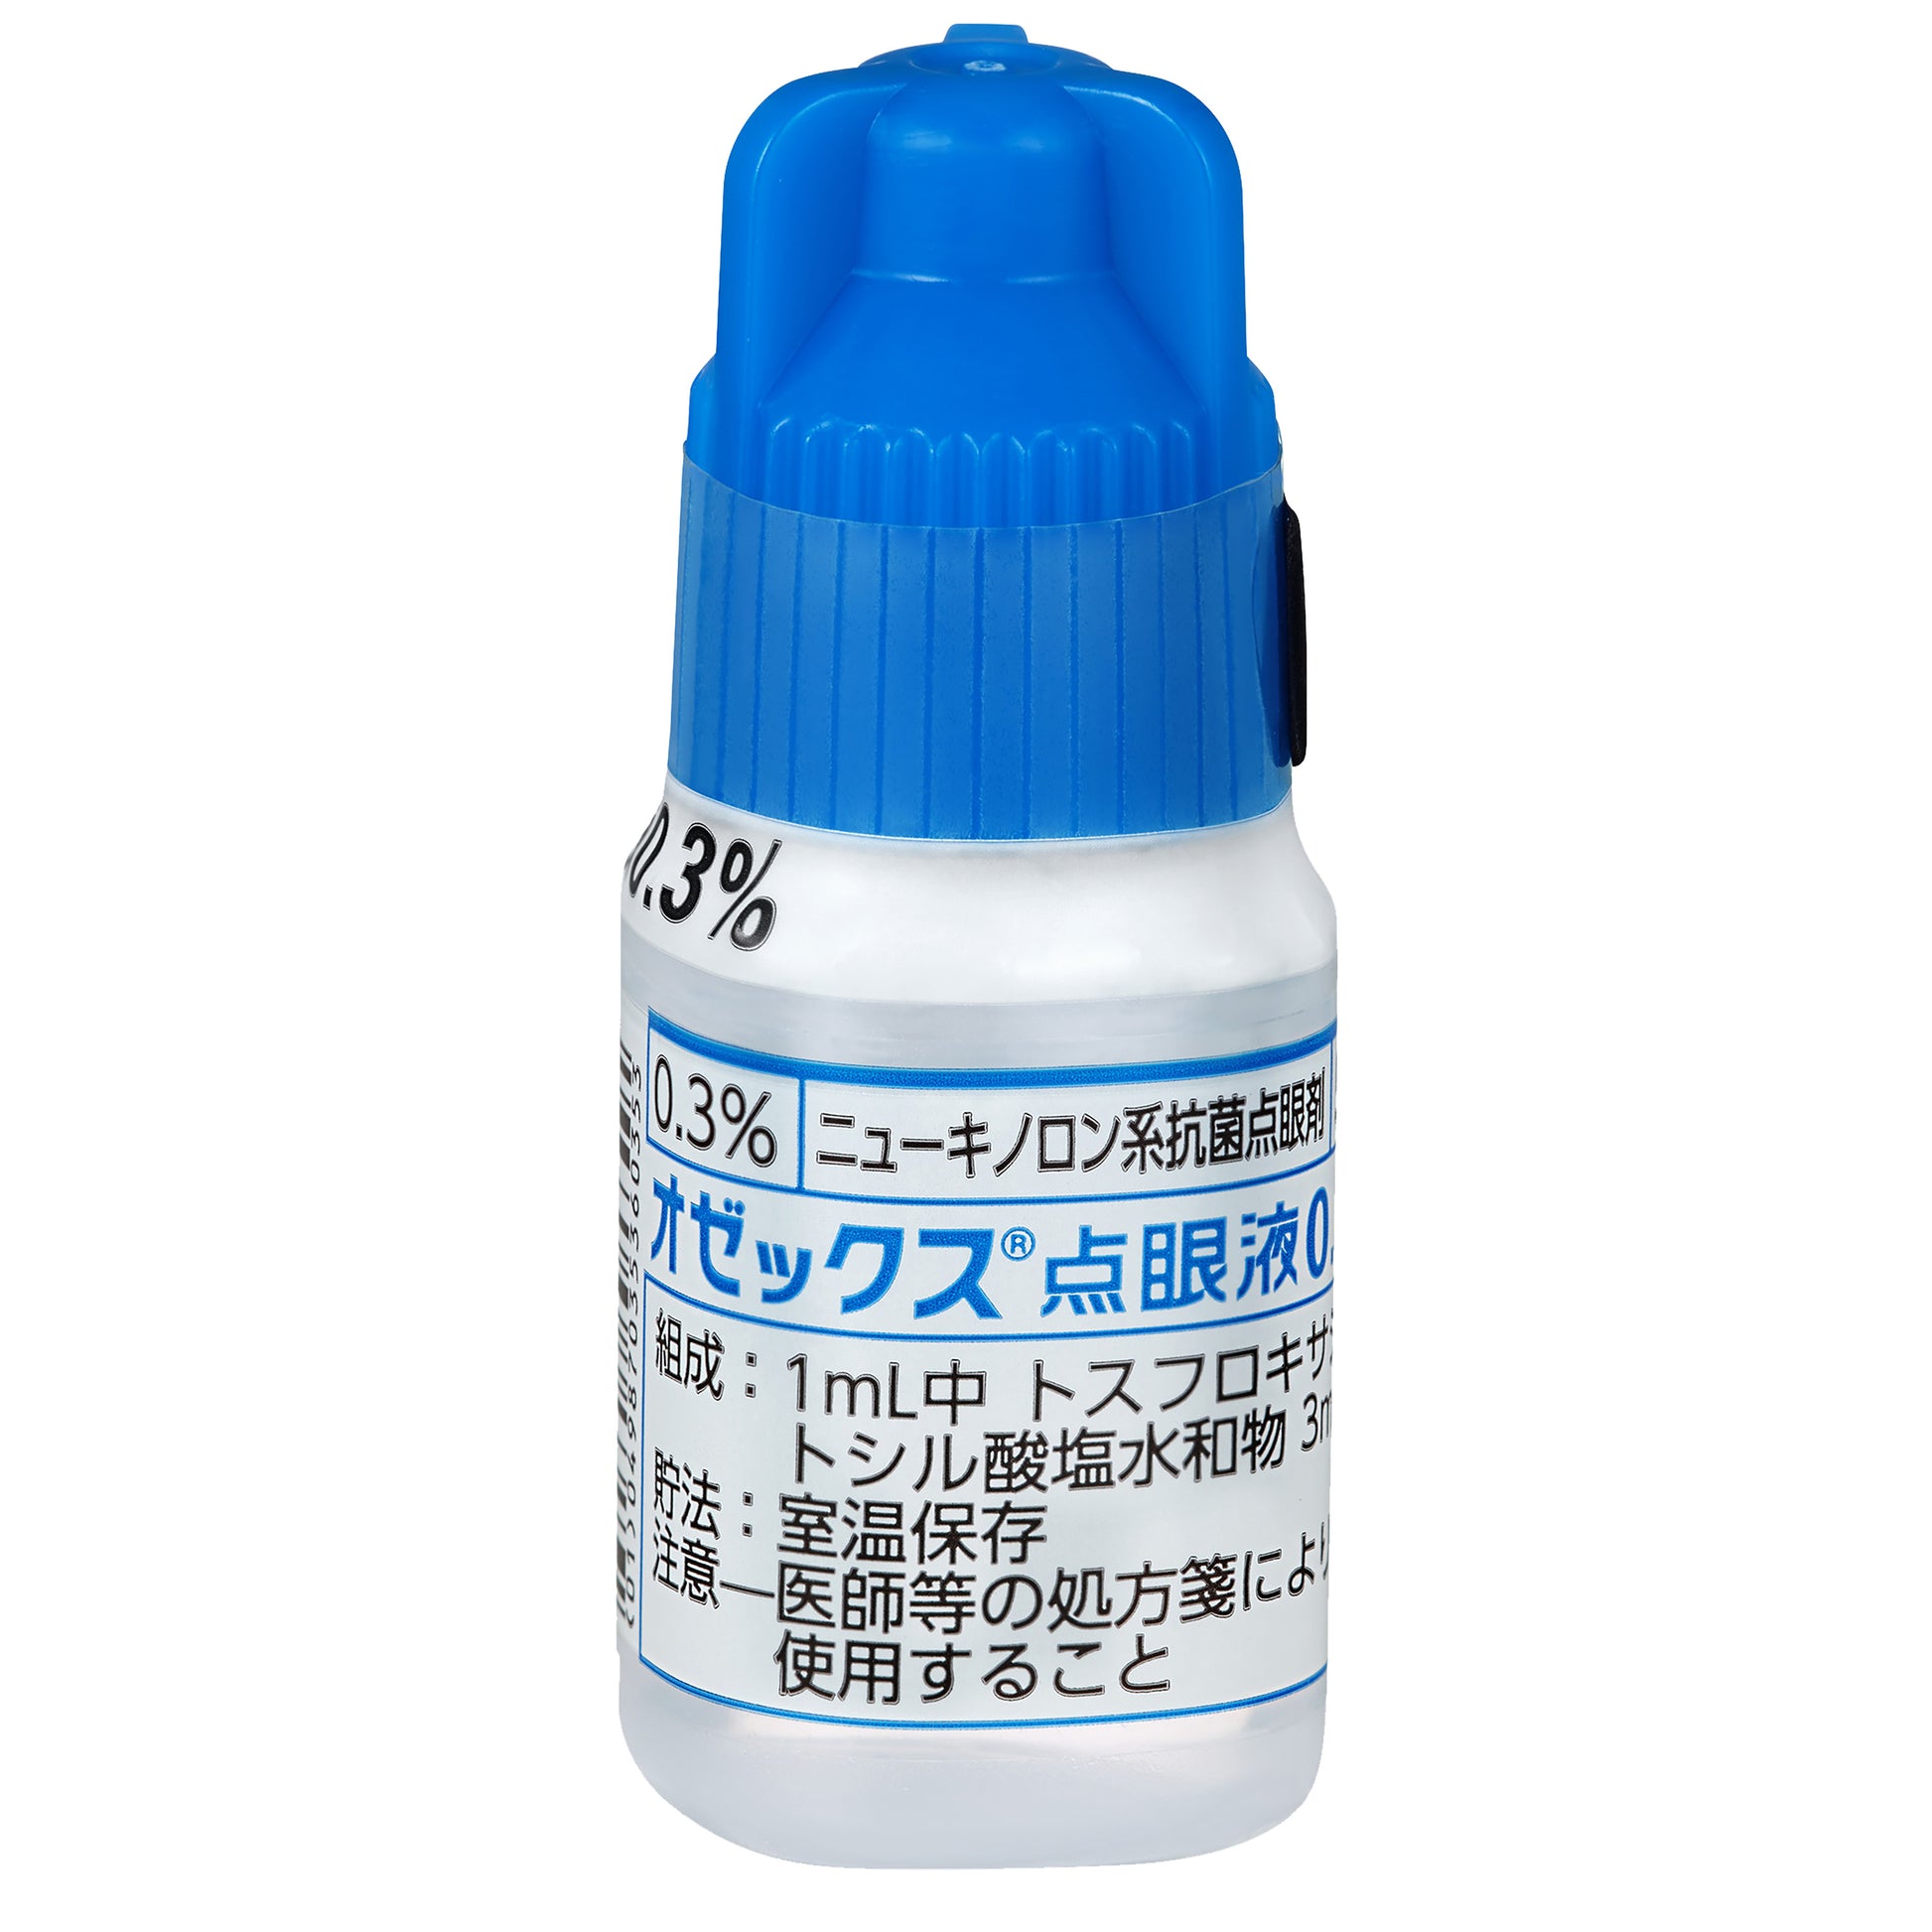 OZEX ophthalmic solution 0.3% [Brand Name] 